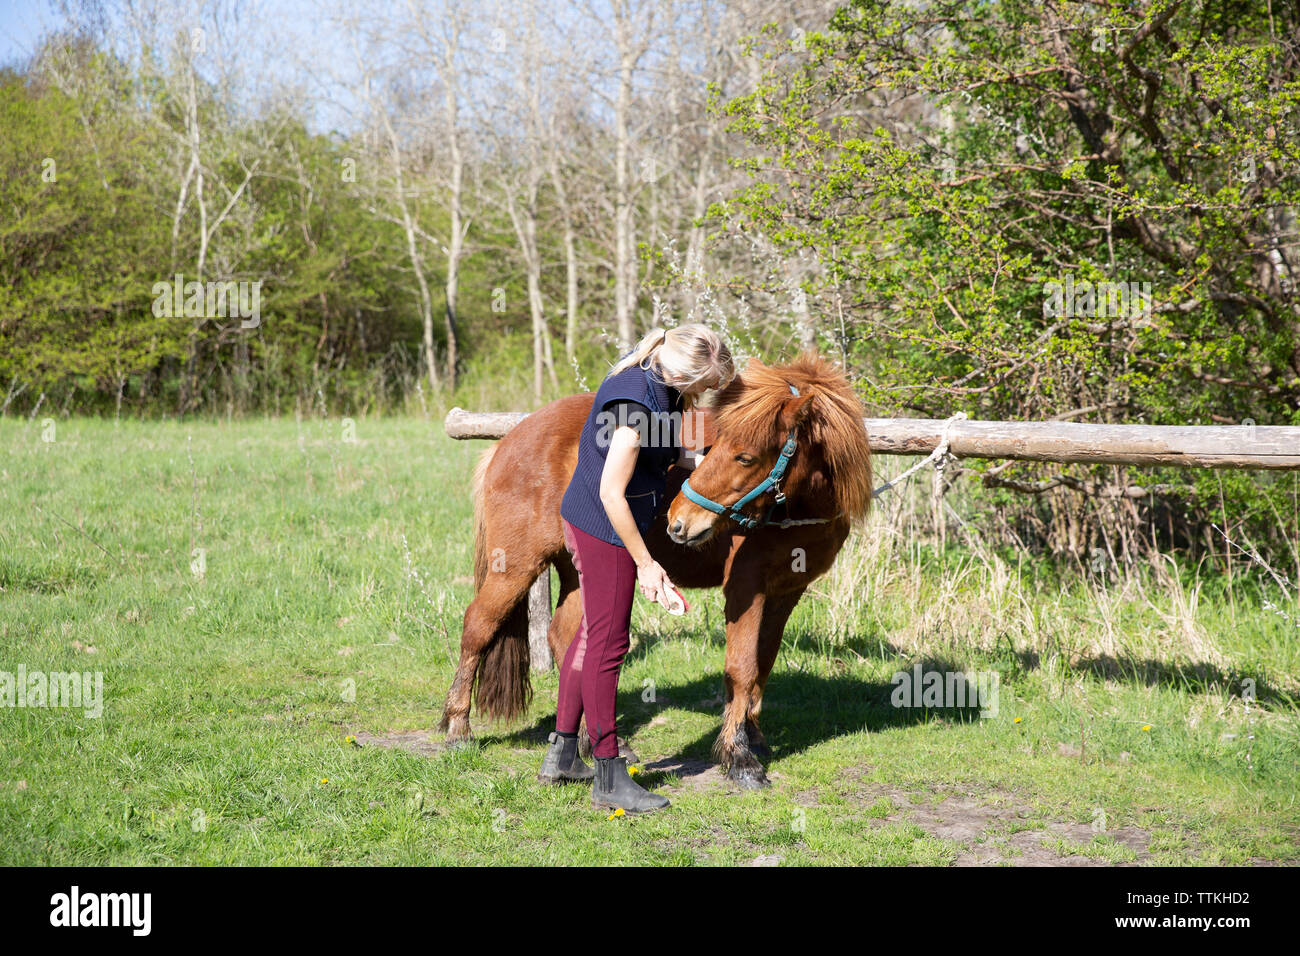 Side view of woman brushing horse while standing on field during sunny day Stock Photo